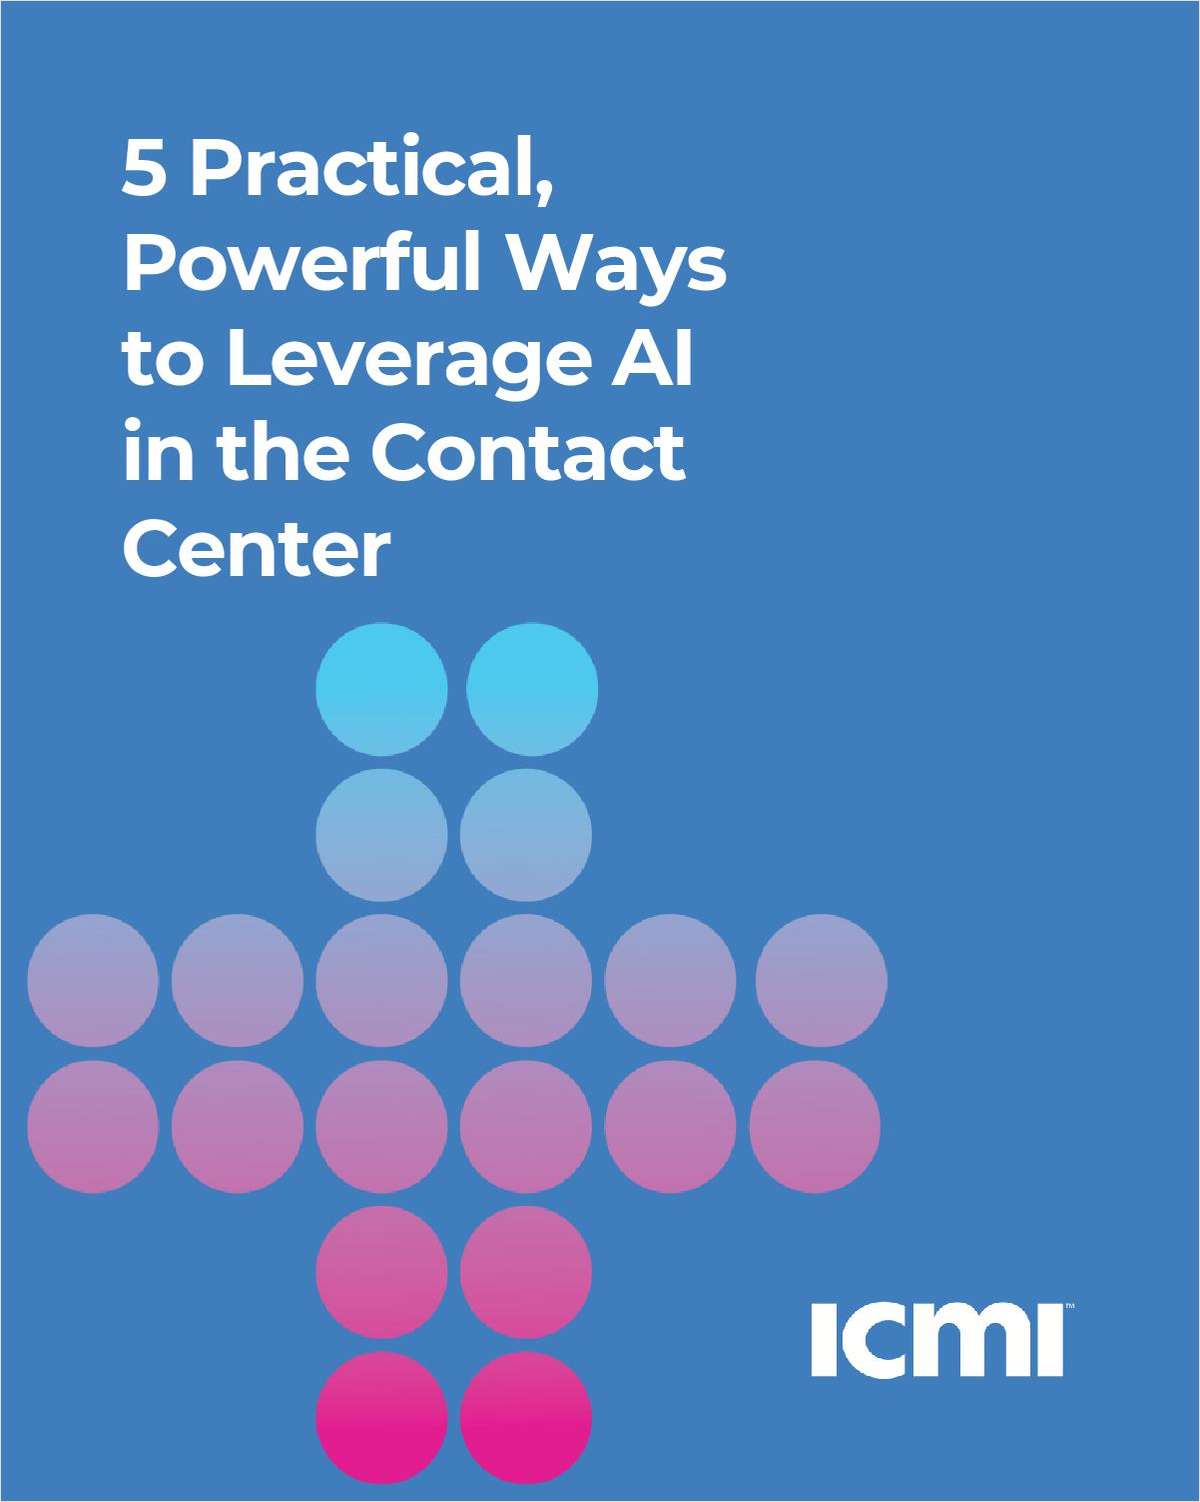 5 Practical, Powerful Ways to Leverage AI in the Contact Center